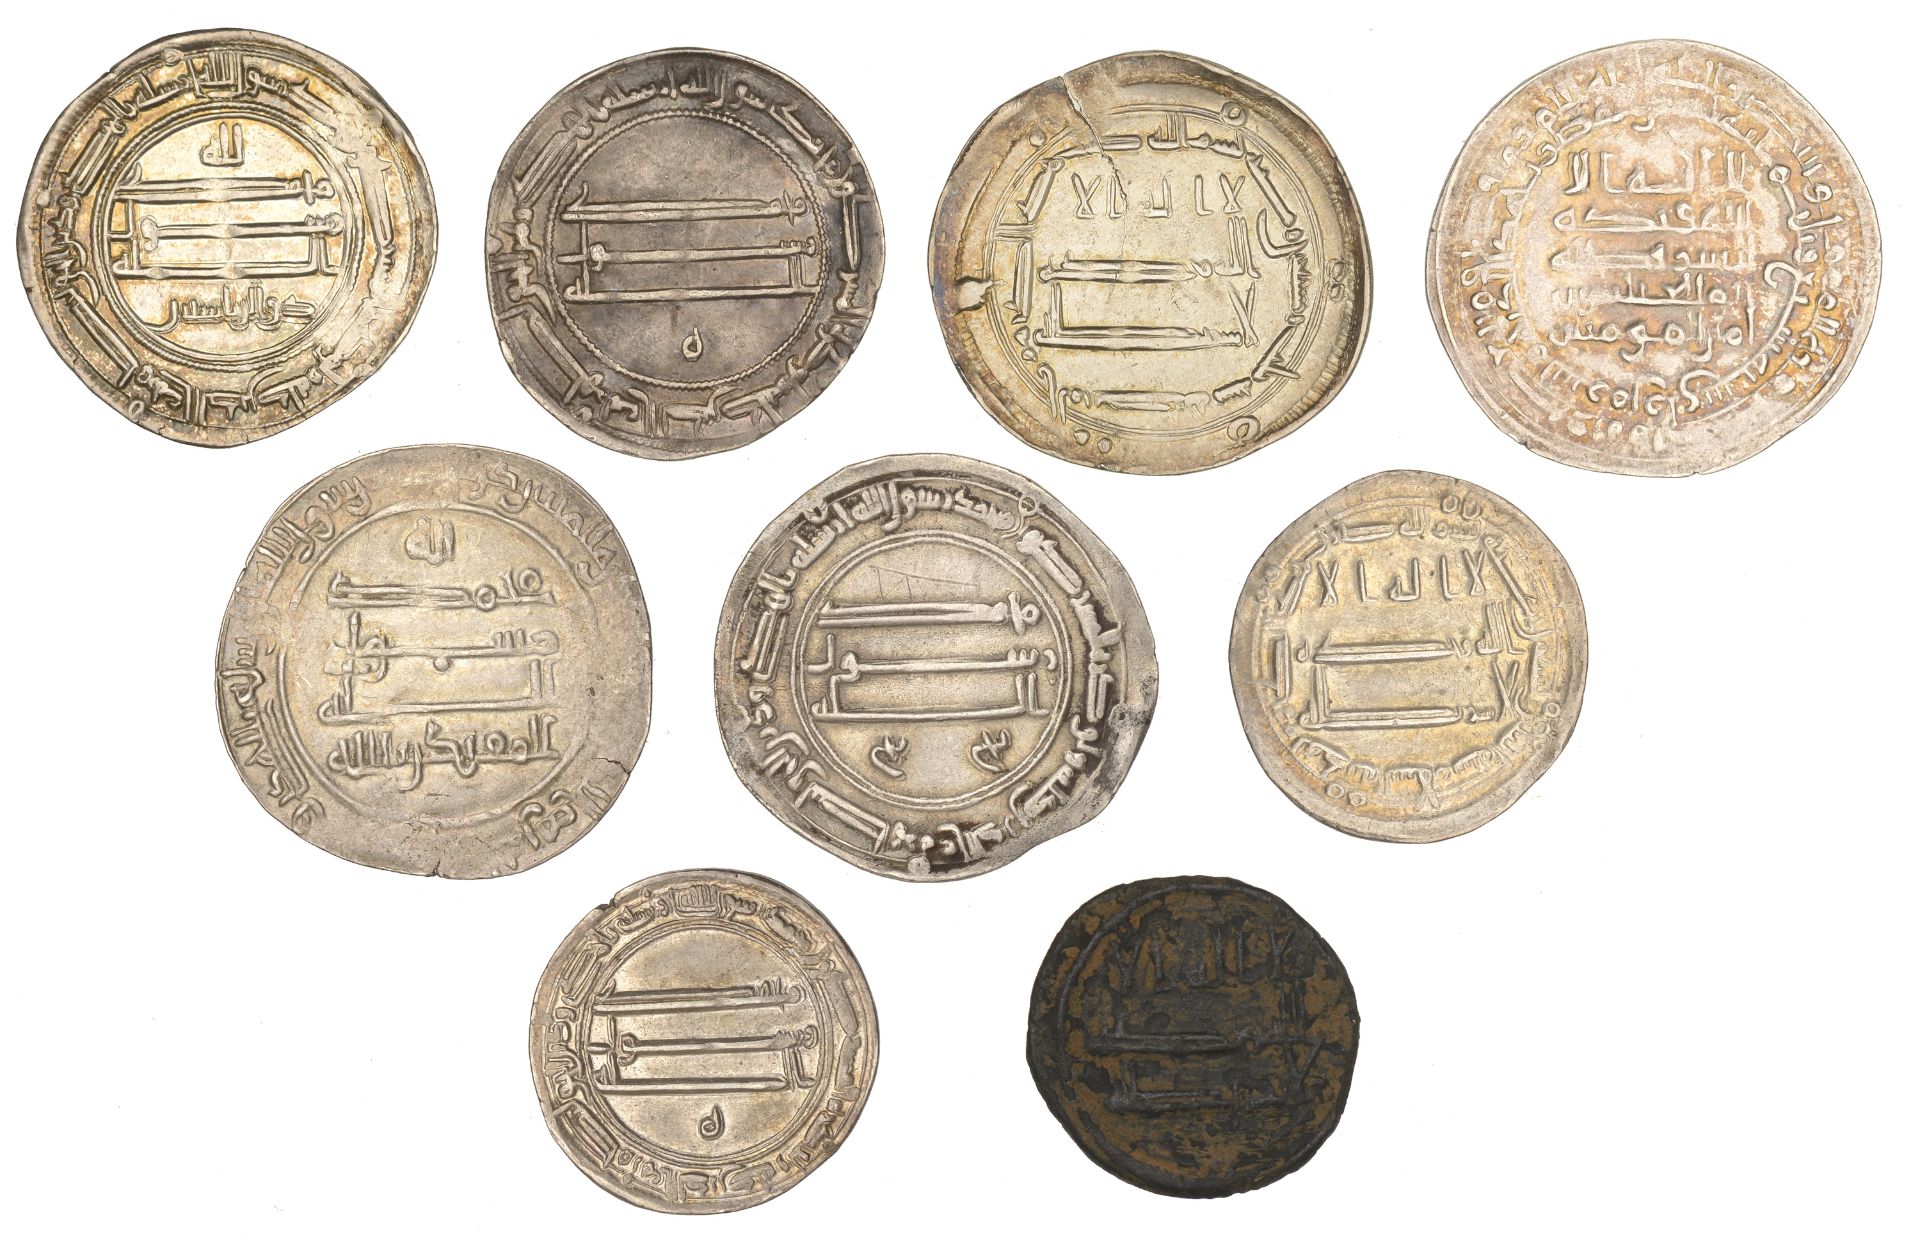 The Hon. Robert Erskine Collection, Part I: Early Persian, Islamic and Crusader Coins - Bild 2 aus 2